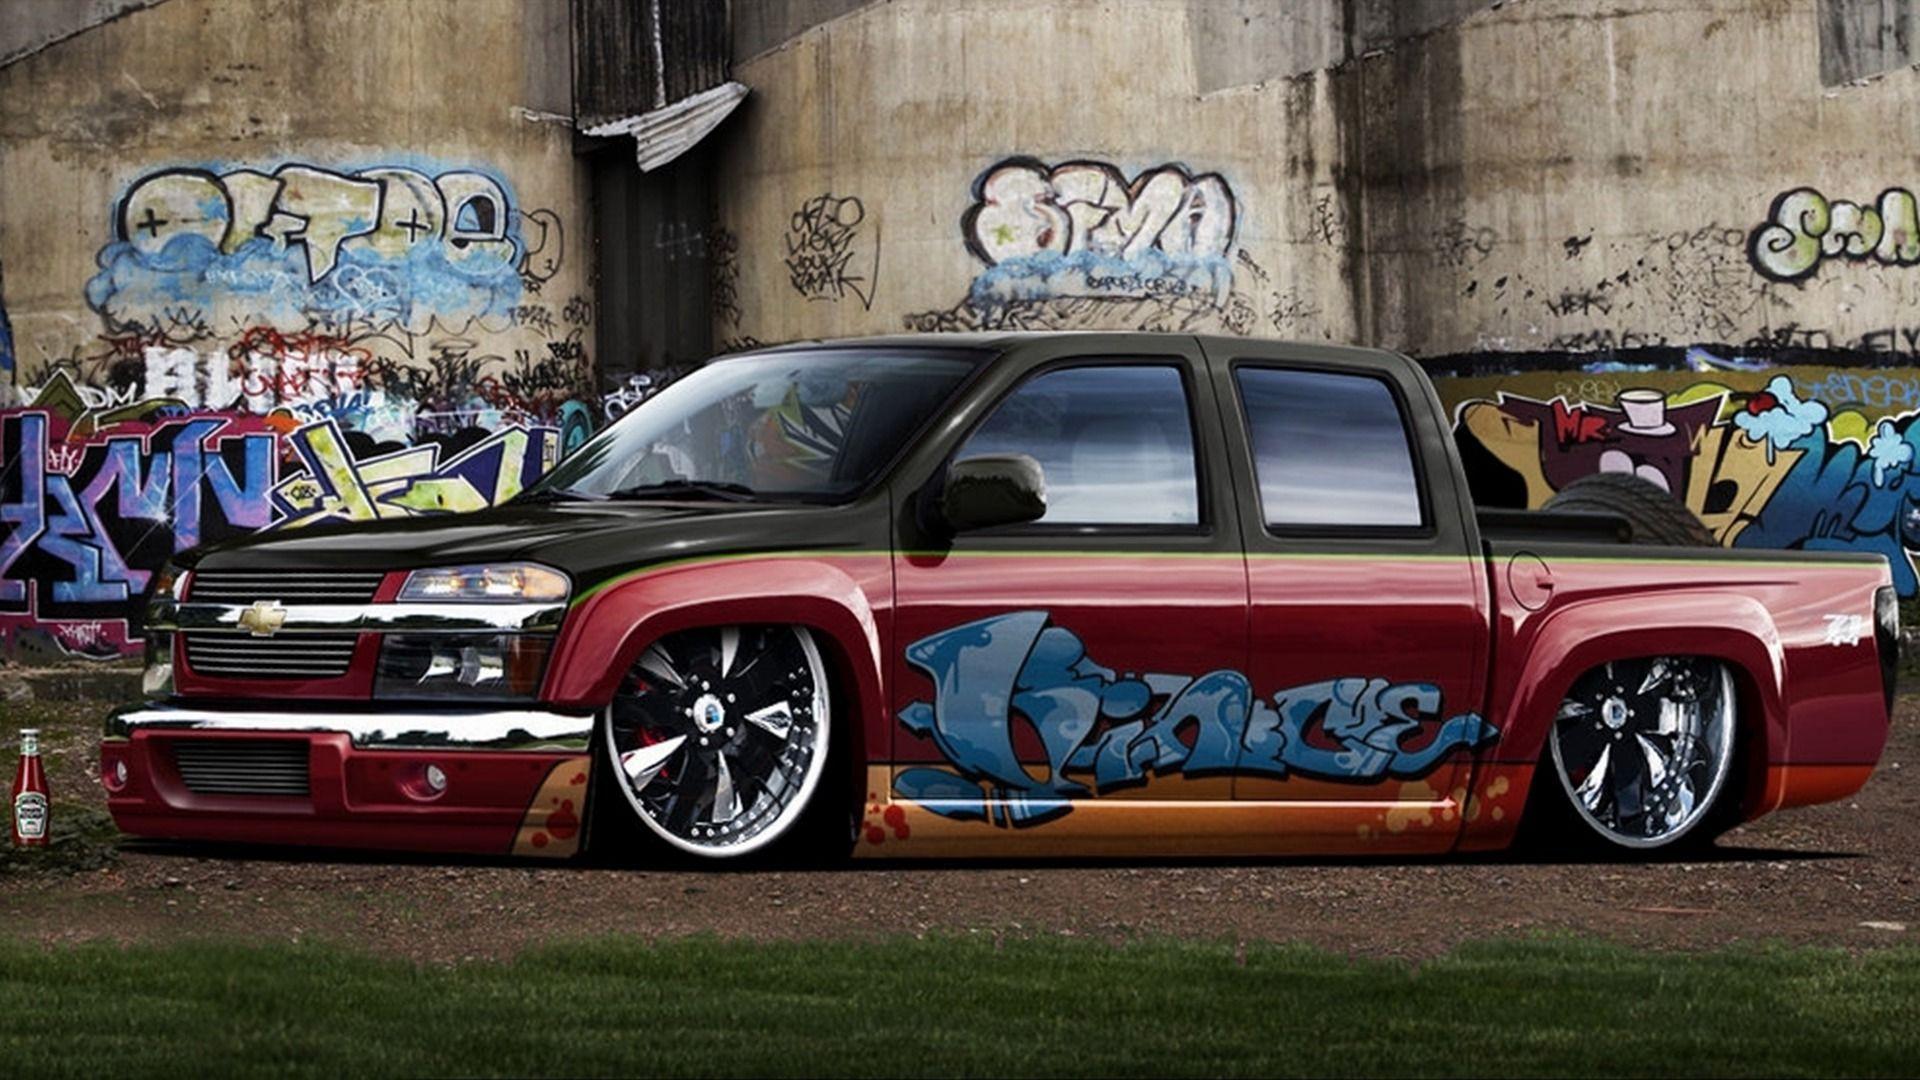 image For > Cool Chevy Truck Wallpaper